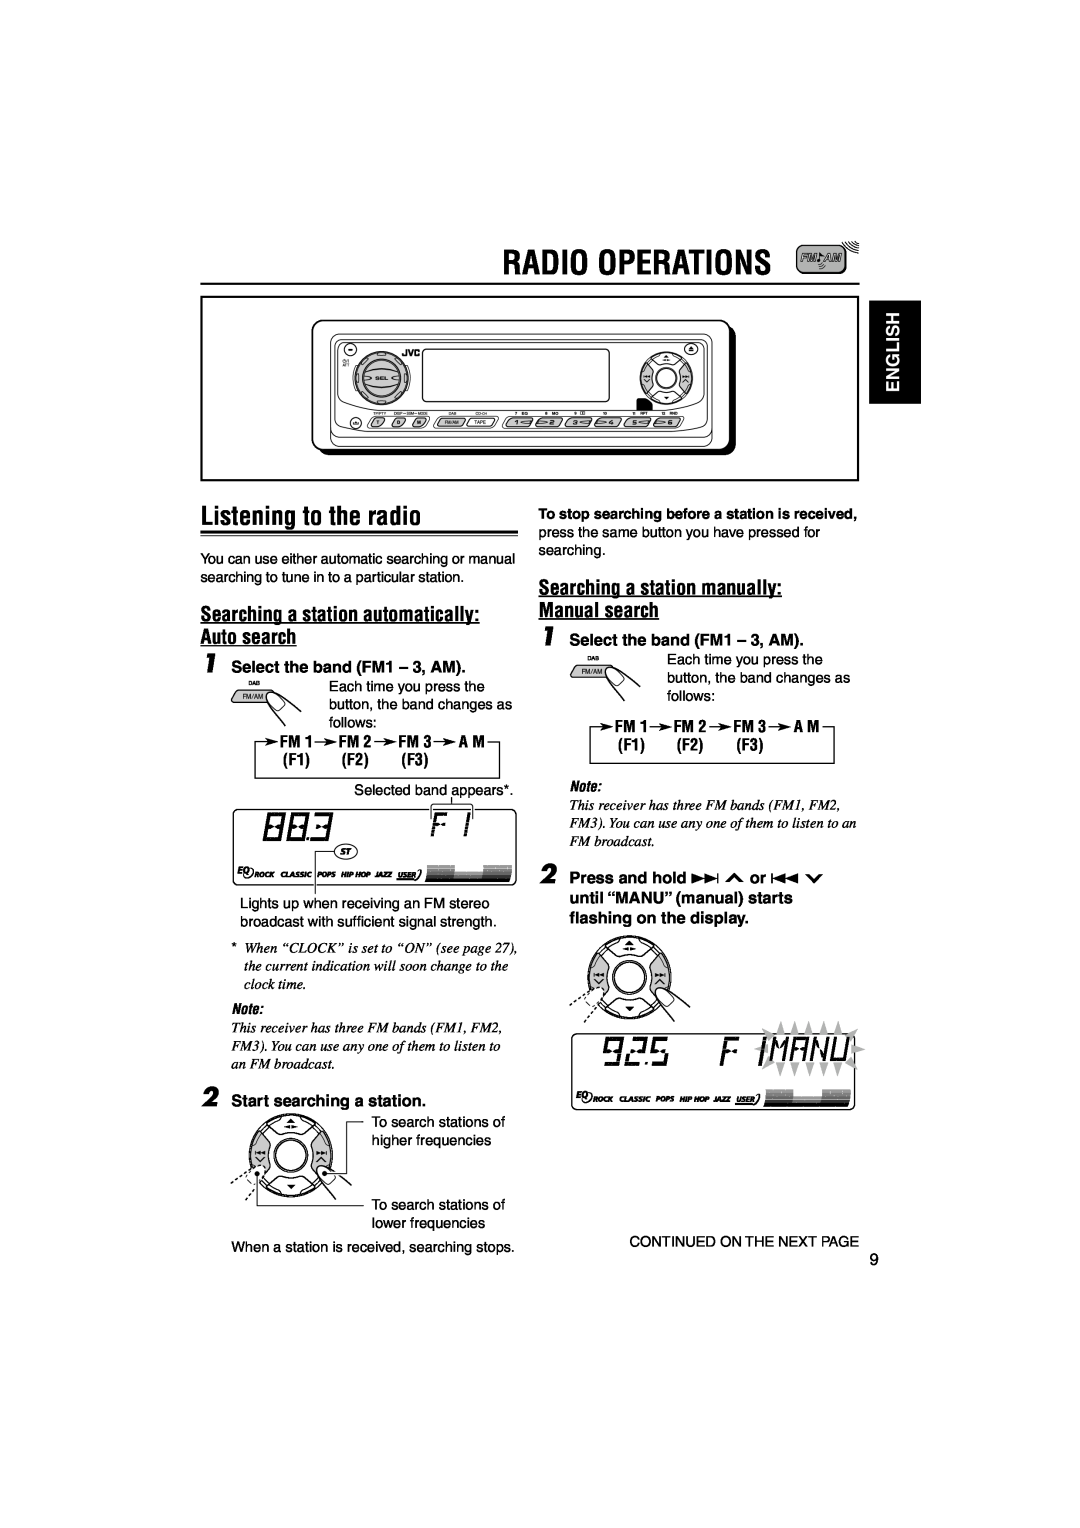 JVC KS-LH60R Radio Operations, Listening to the radio, Searching a station automatically Auto search, English, follows 